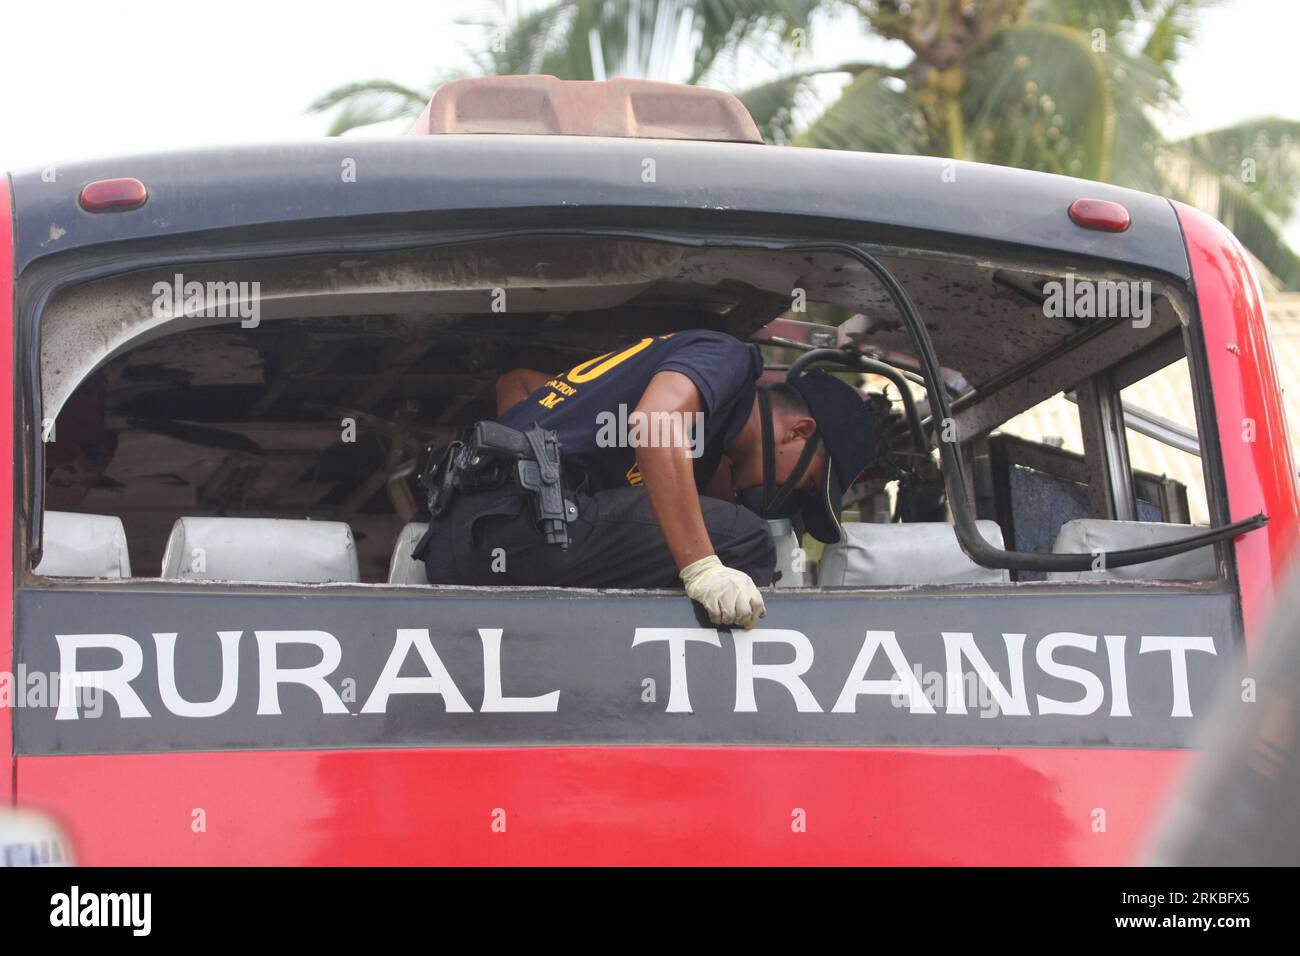 Bildnummer: 54553353  Datum: 21.10.2010  Copyright: imago/Xinhua (101021) -- MATALAM , Oct. 21, 2010 (Xinhua) -- Policemen investigate inside a bus in which an explosive device went off in Dalapitan, Matalam town in the province of North Cotabato, Philippines, Oct. 21, 2010. A bomb exploded inside a passenger bus Thursday in the southern Philippines, killing at least nine and injuring seven others. (Xinhua/Stringer) (zf) PHILIPPINES-MATALAM-BOMB EXPLOSION PUBLICATIONxNOTxINxCHN Gesellschaft Bombenanschlag Bus Attentat kbdig xsp 2010 quer     Bildnummer 54553353 Date 21 10 2010 Copyright Imago Stock Photo